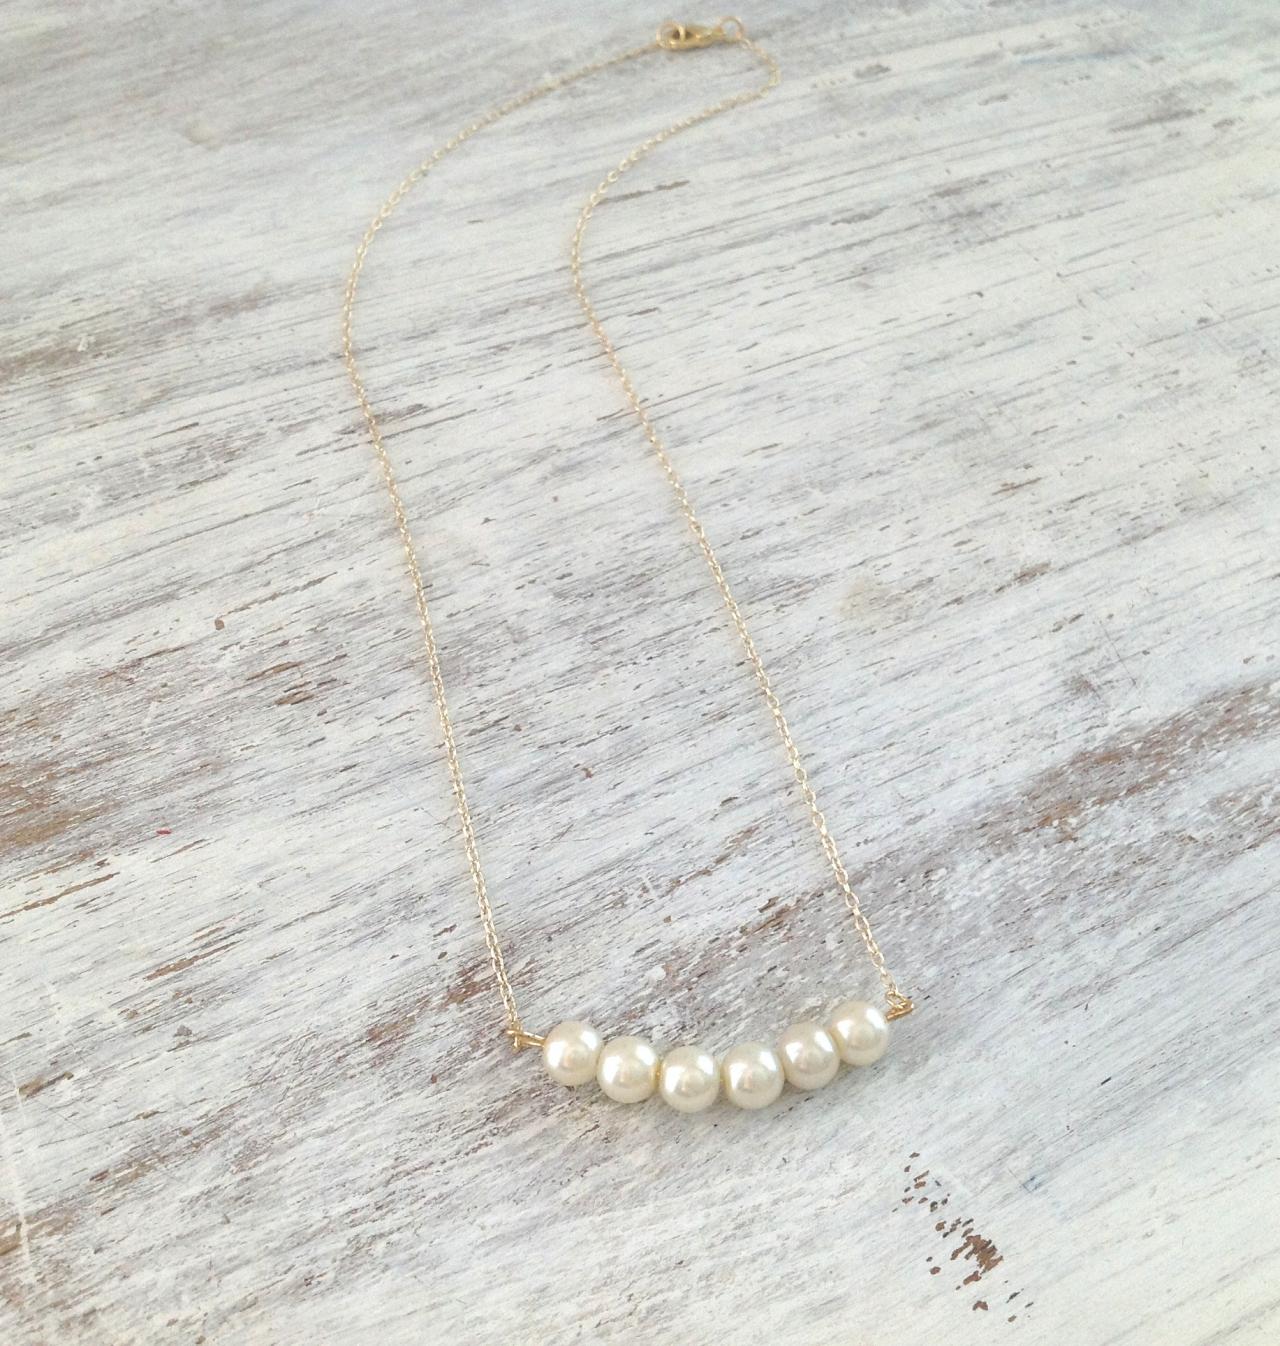 bridesmaid necklace, gold necklace, gift for her, white pearls and gold, gold necklace, weddings - 557